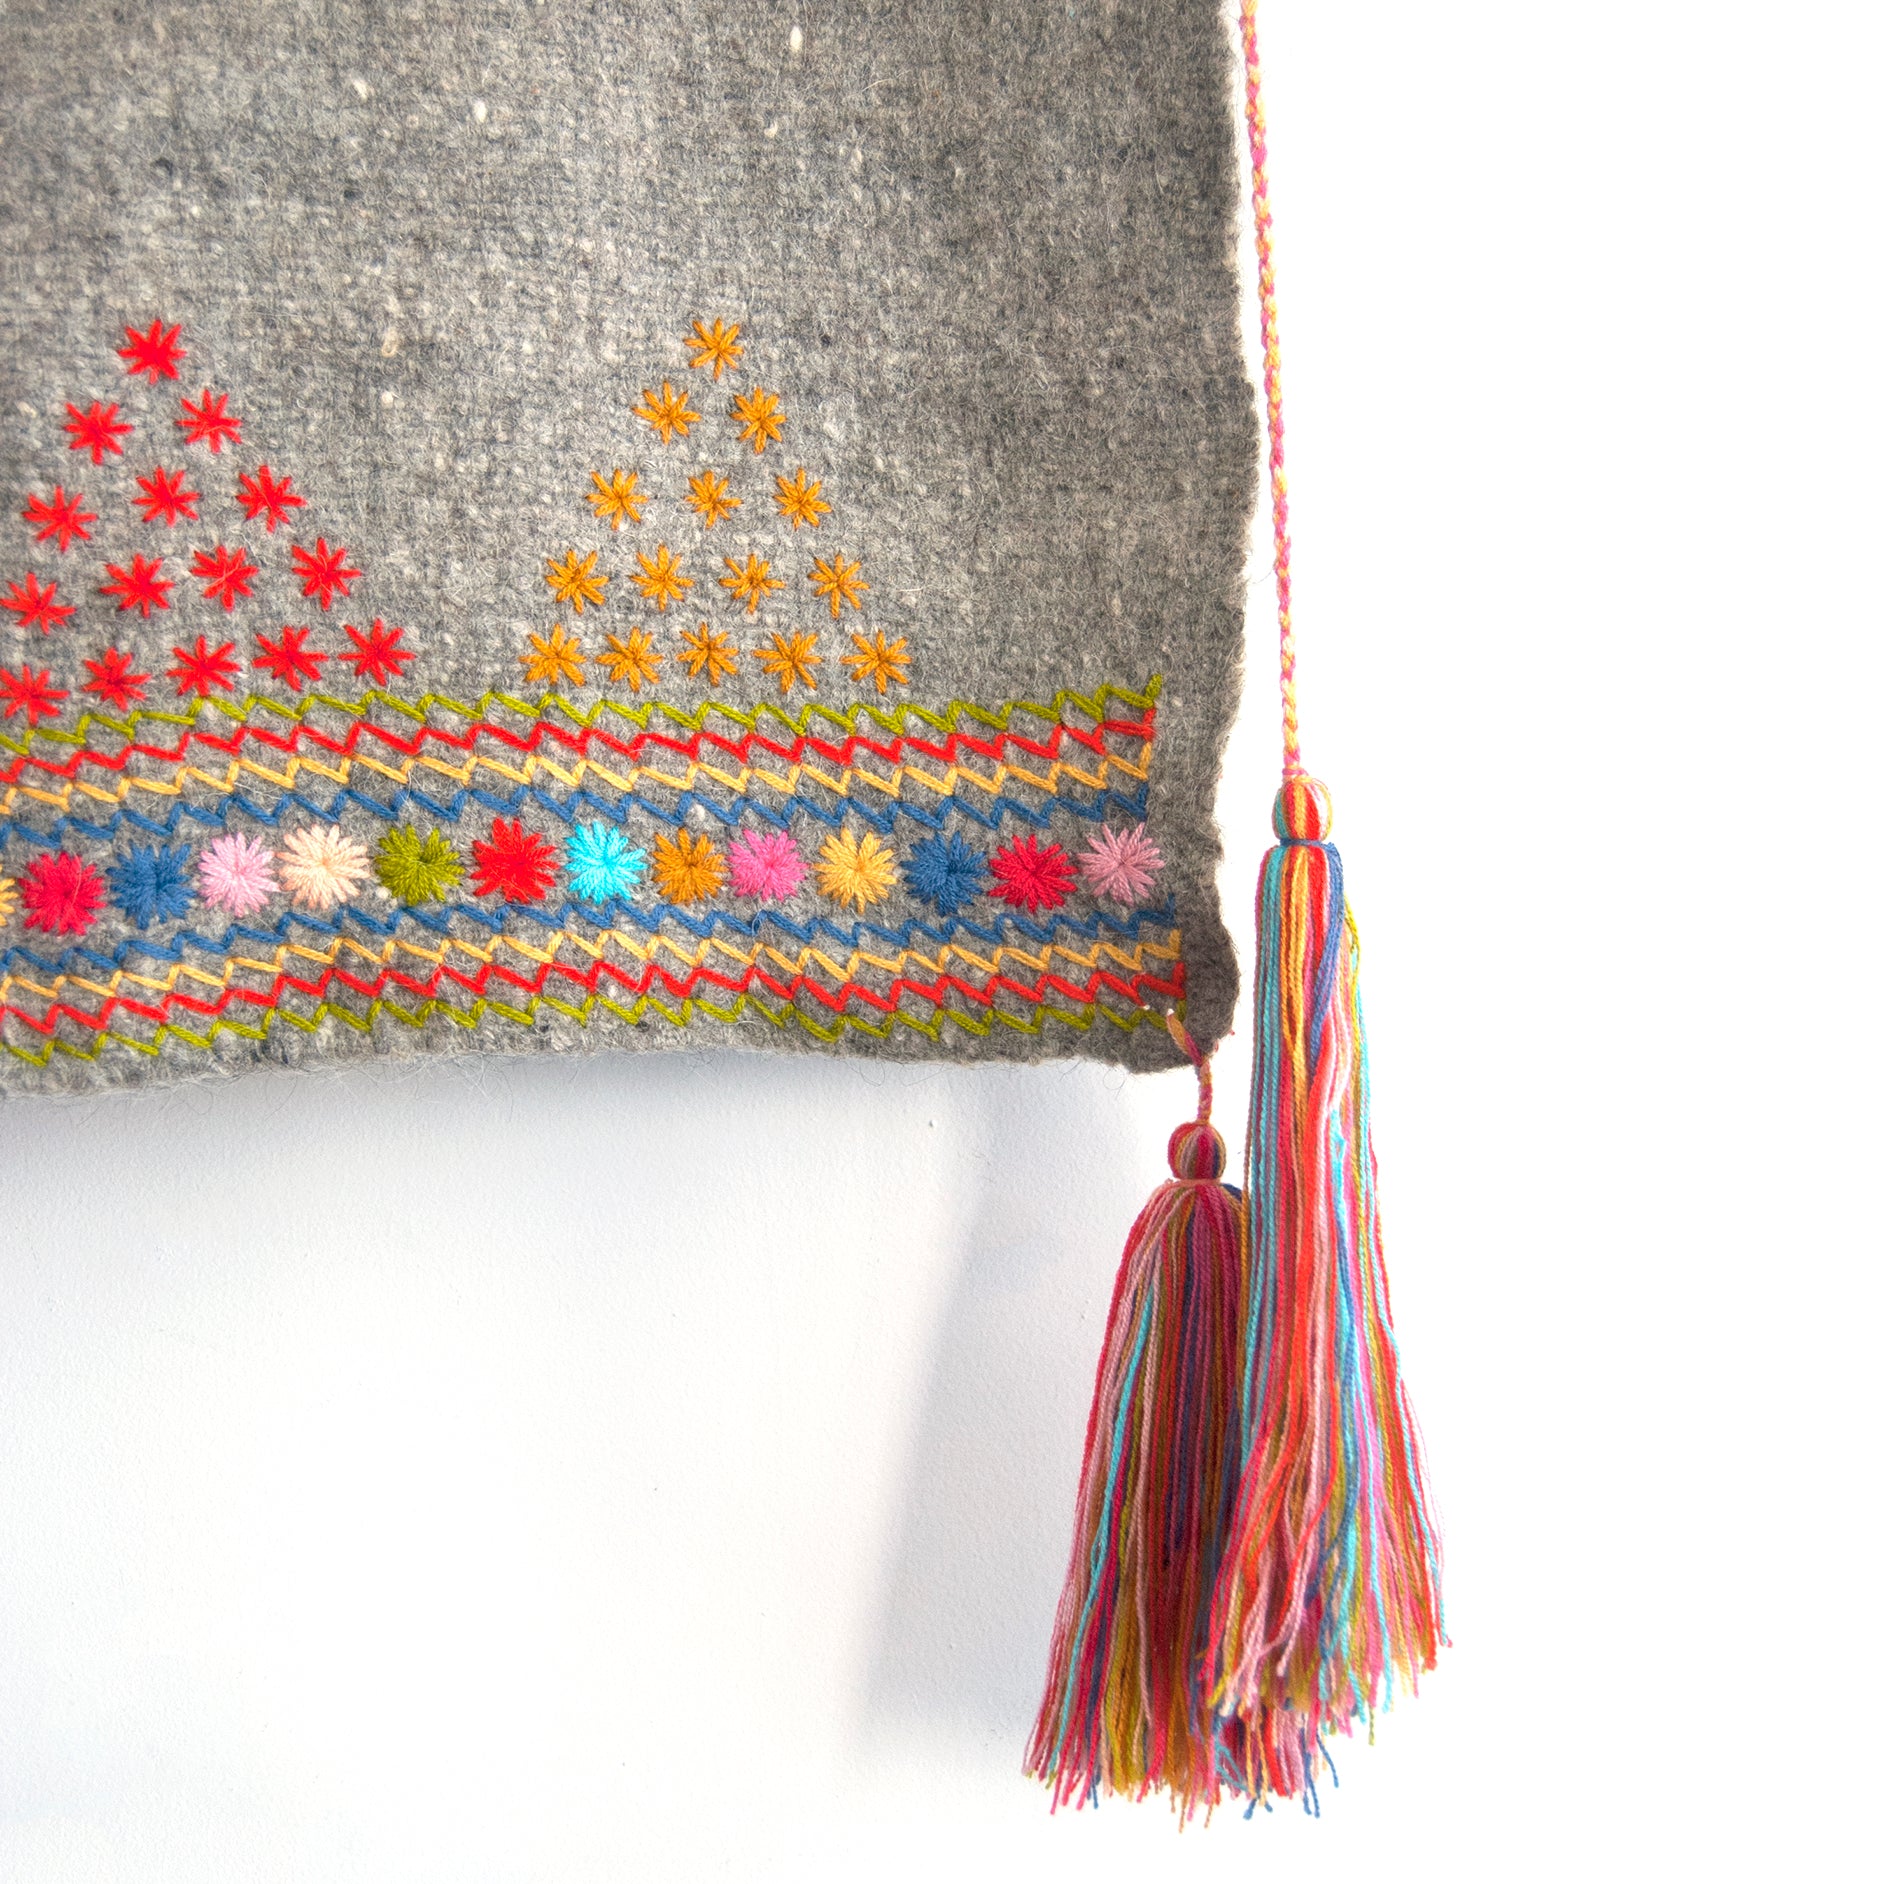 Detail of grey wool throw with colorful embroidered trim and multicolor corner tassels